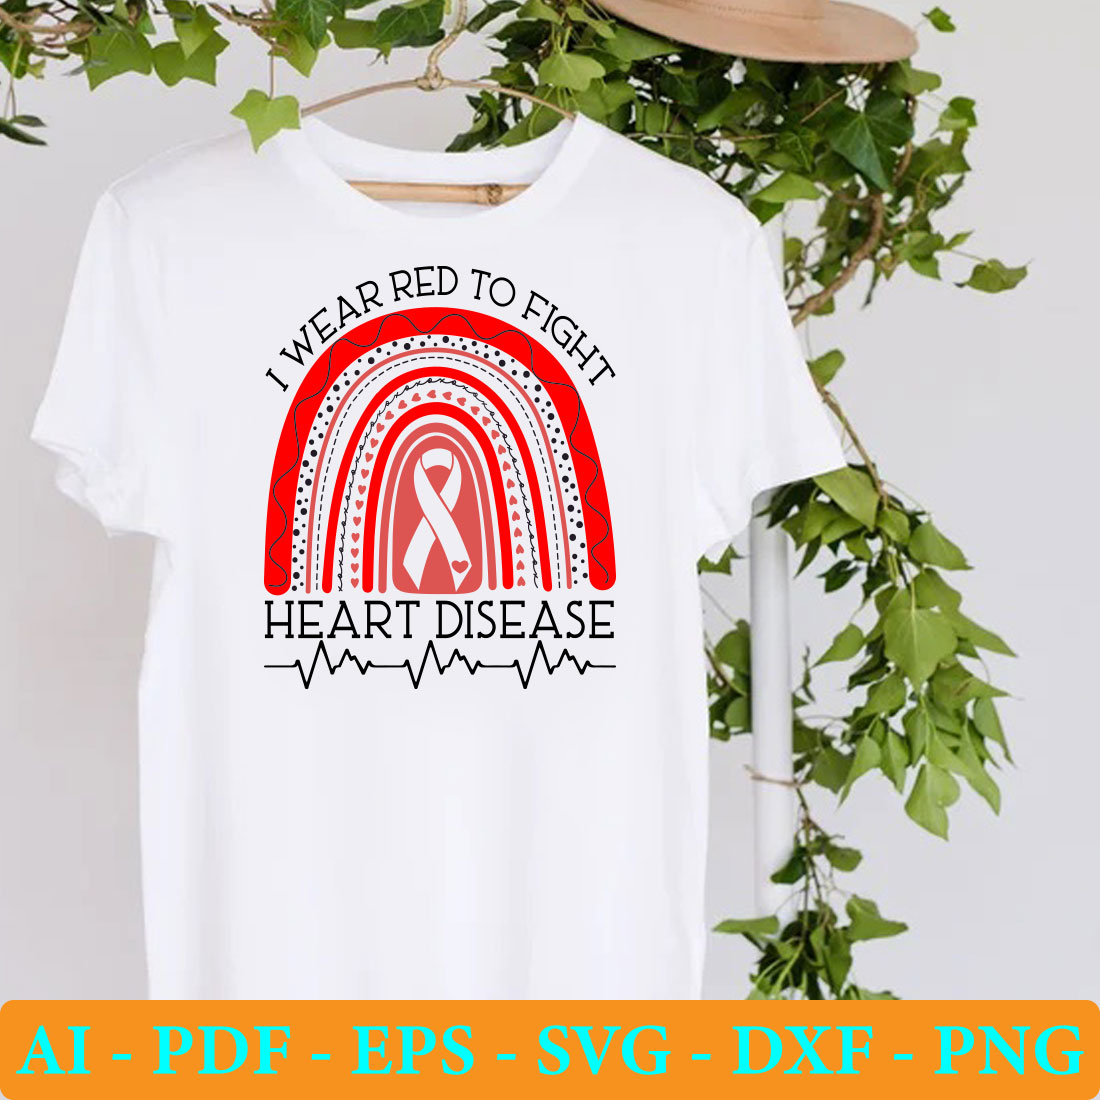 T - shirt that says i wear red to fight heart disease.